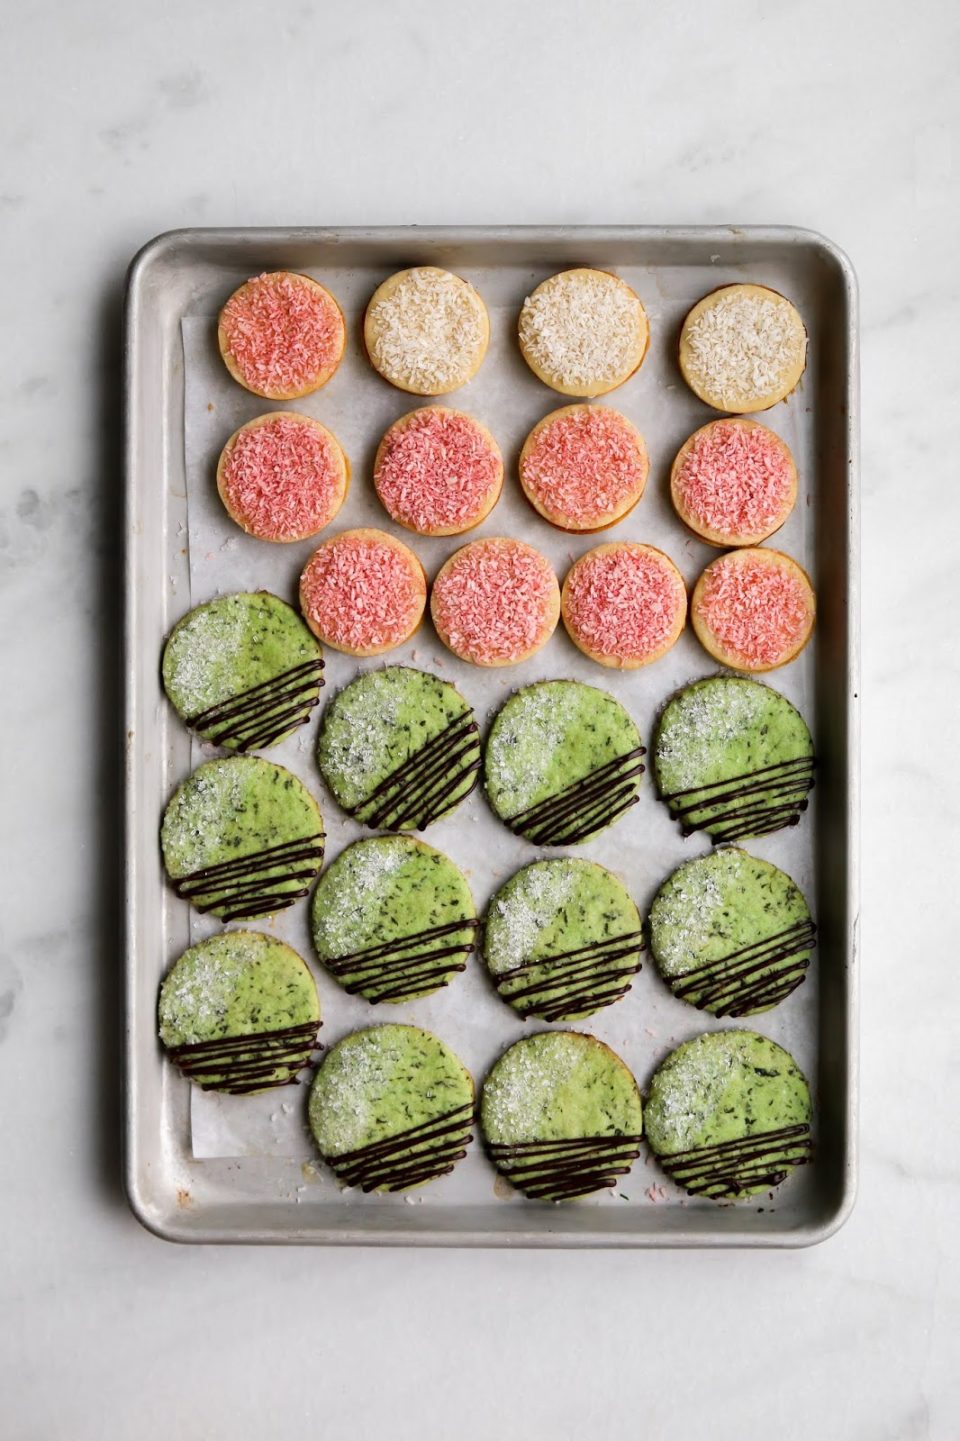 Store Your Holiday Goodies in Style with Tupperware + Bonus Grinchmas  Cookies #Recipe! #MBPHGG18 - Mommy's Block Party